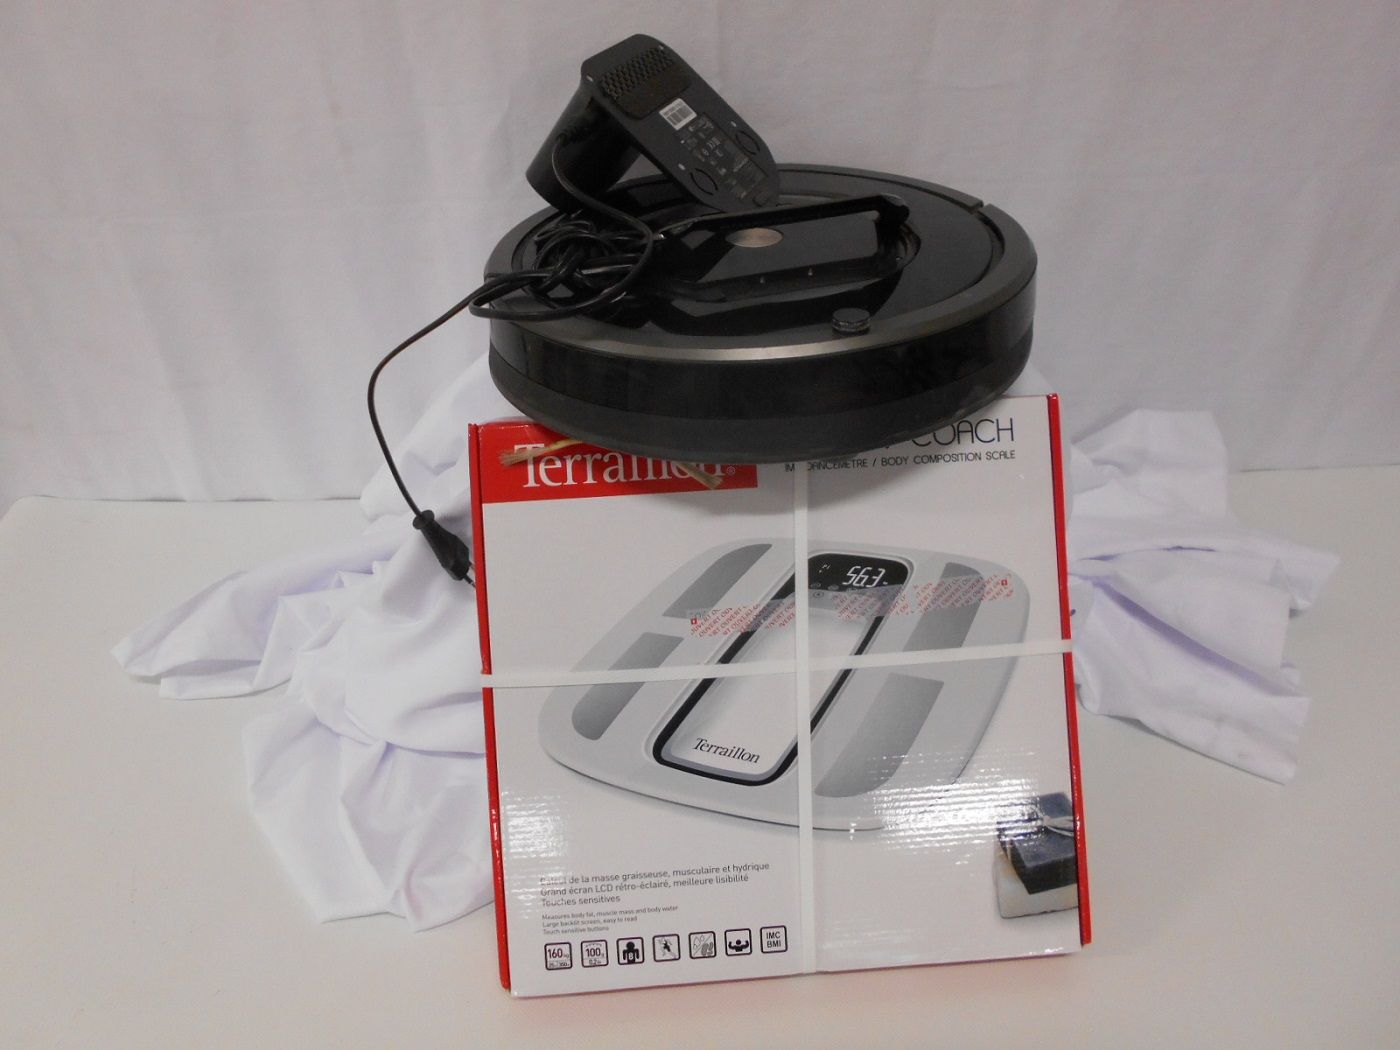 Null Lot including:
- IROBIT Roomba vacuum cleaner. 
- TERAILLON WINDOW COACH sc&hellip;